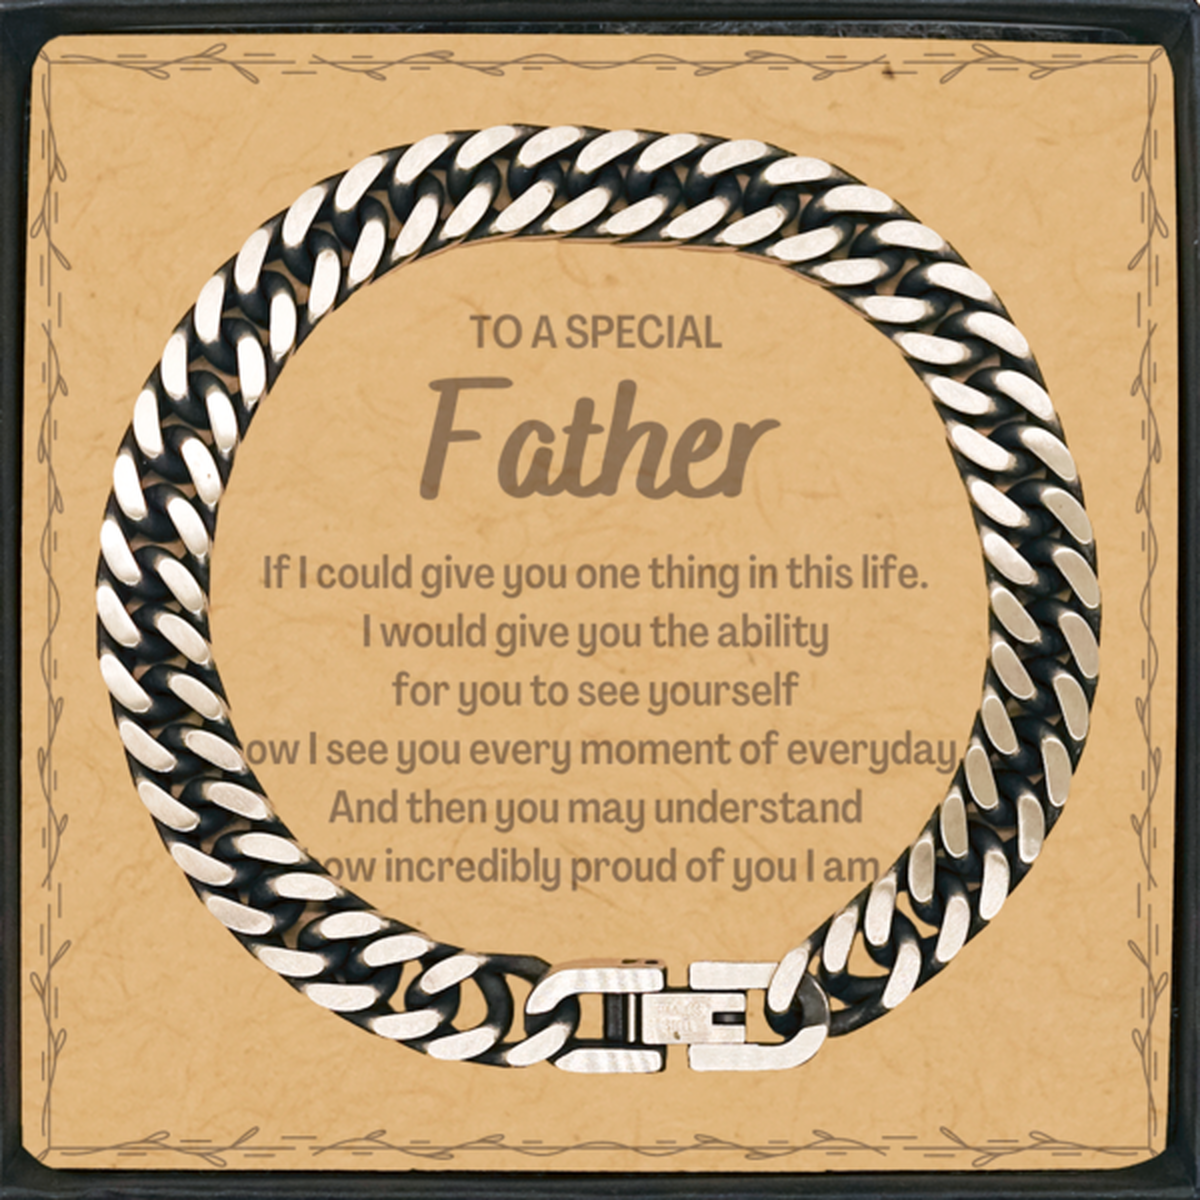 To My Father Cuban Link Chain Bracelet, Gifts For Father Message Card, Inspirational Gifts for Christmas Birthday, Epic Gifts for Father To A Special Father how incredibly proud of you I am